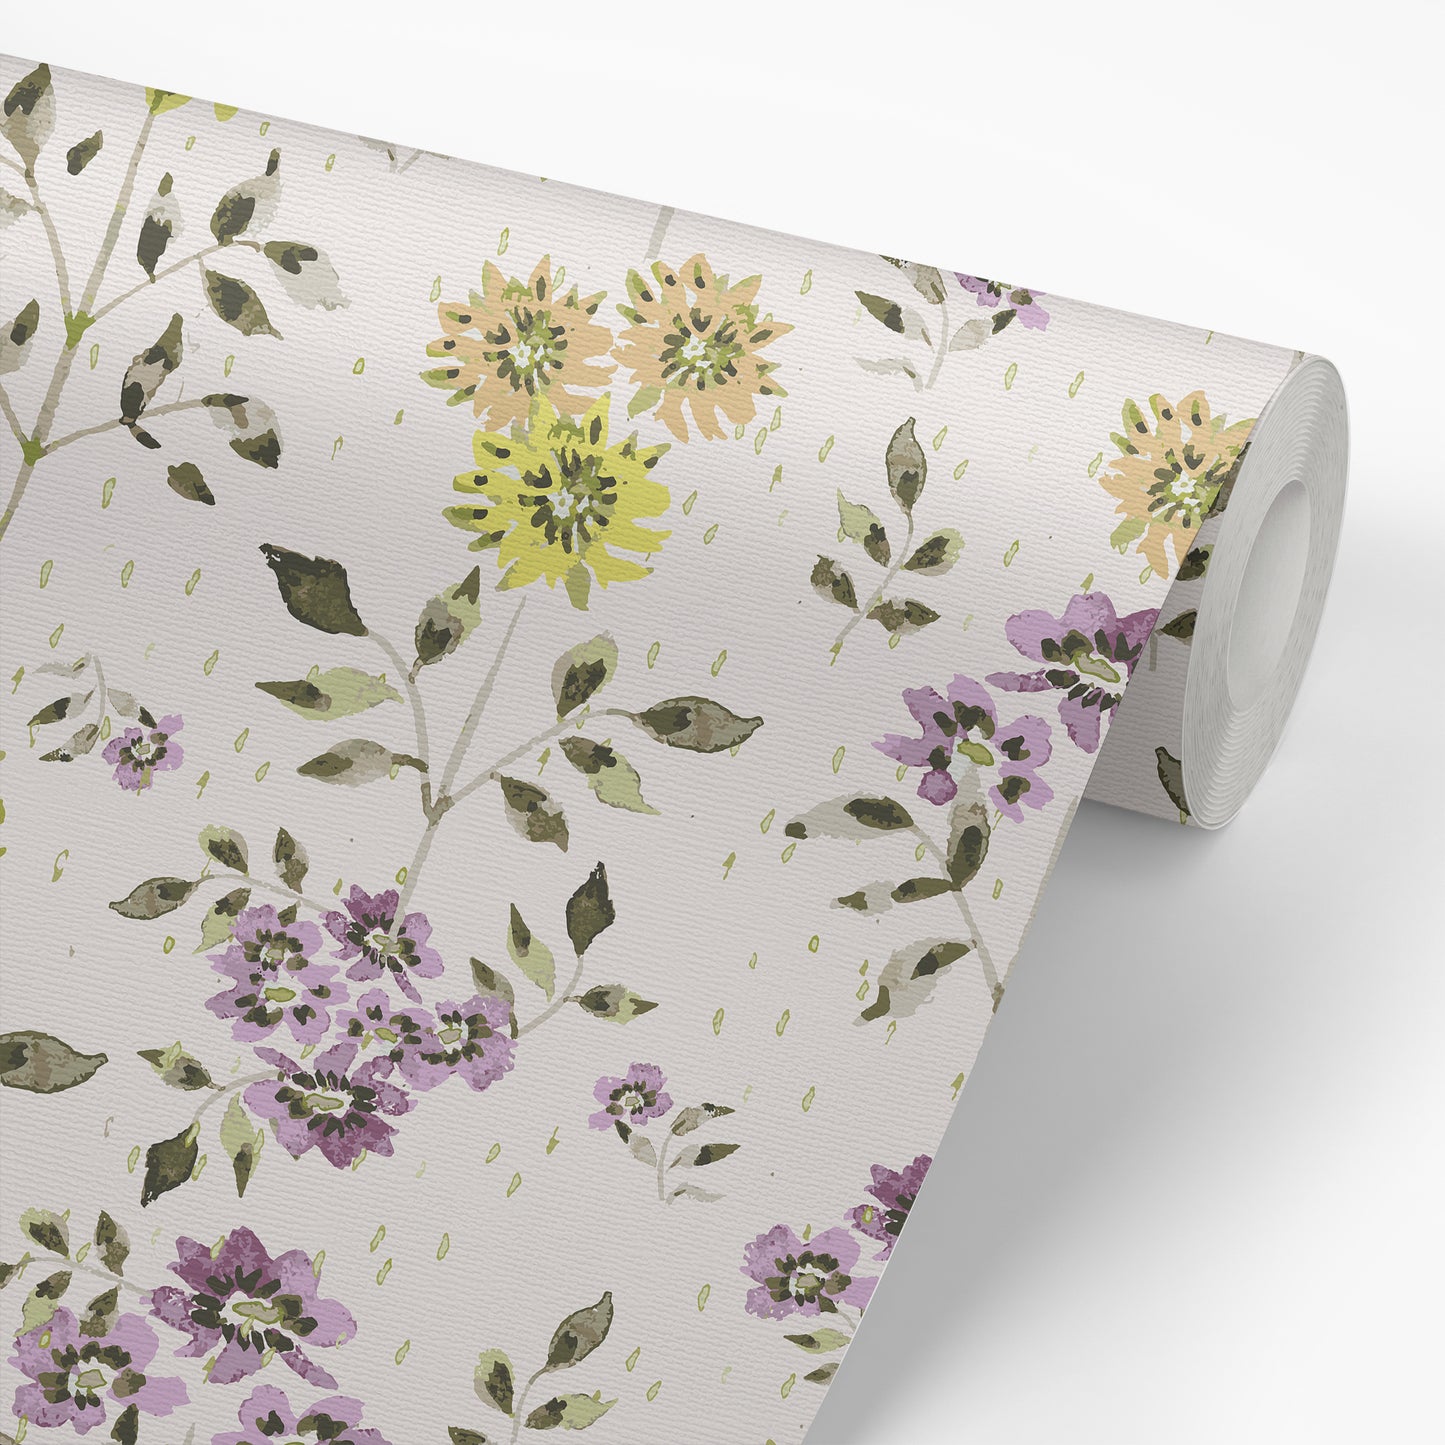 Picture of wallpaper on roll of peel-and-stick high-quality floral print with lavender, yellow, and orange blooms.